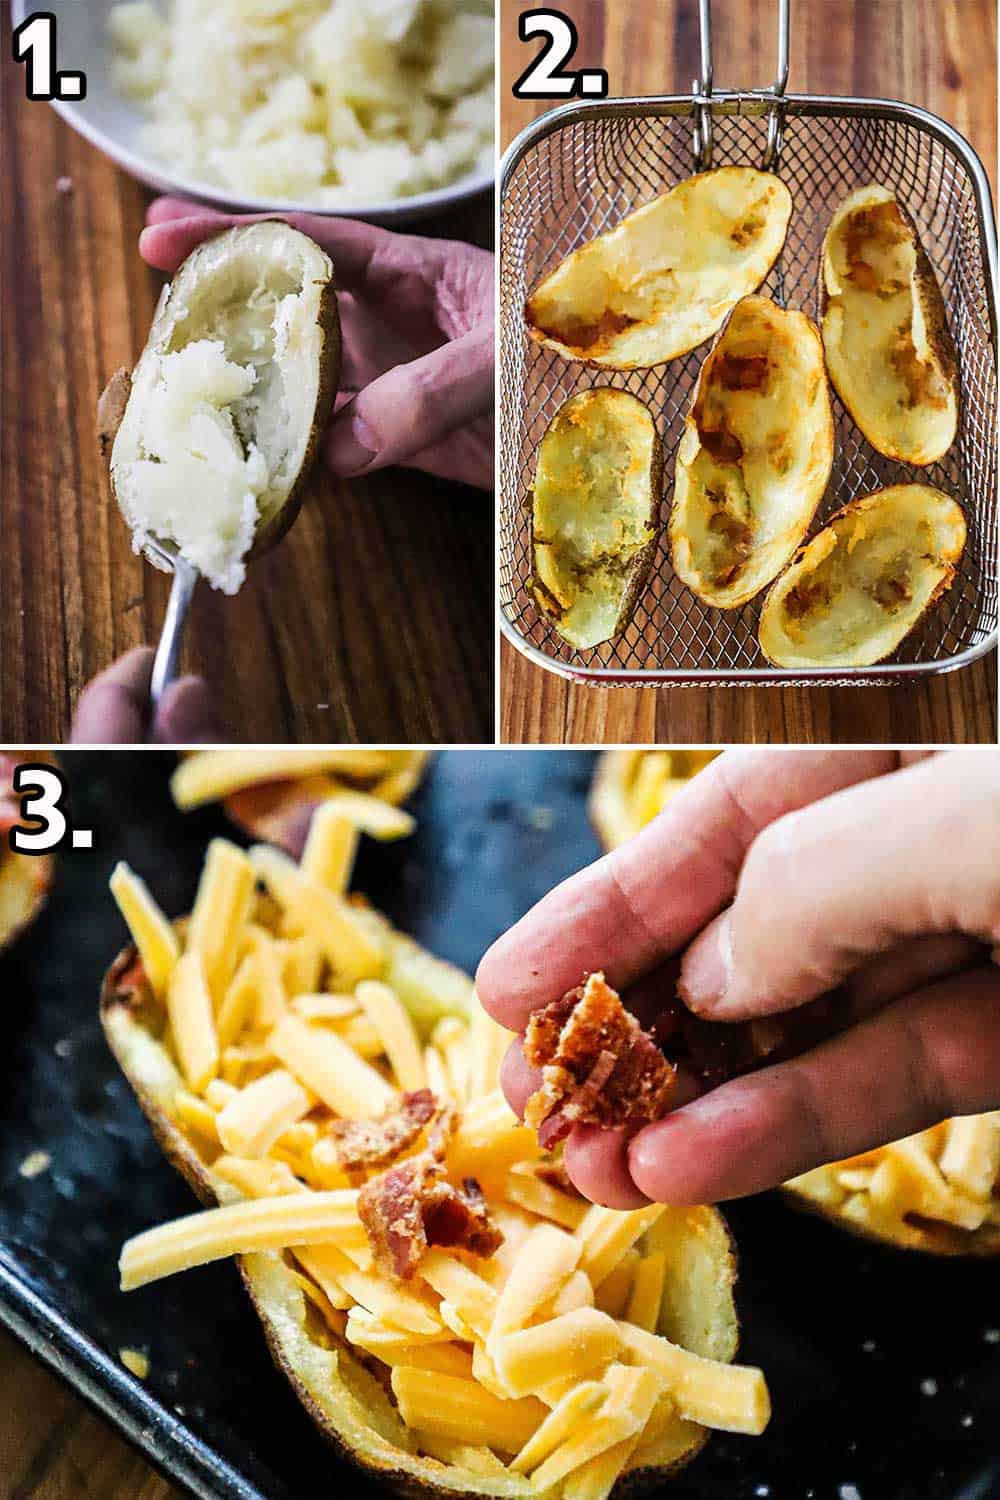 A person using a spoon to scoop out the flesh of a cooked potato half, and then 5 potato skins in a fryer basket and then bacon being added to a potato skin.